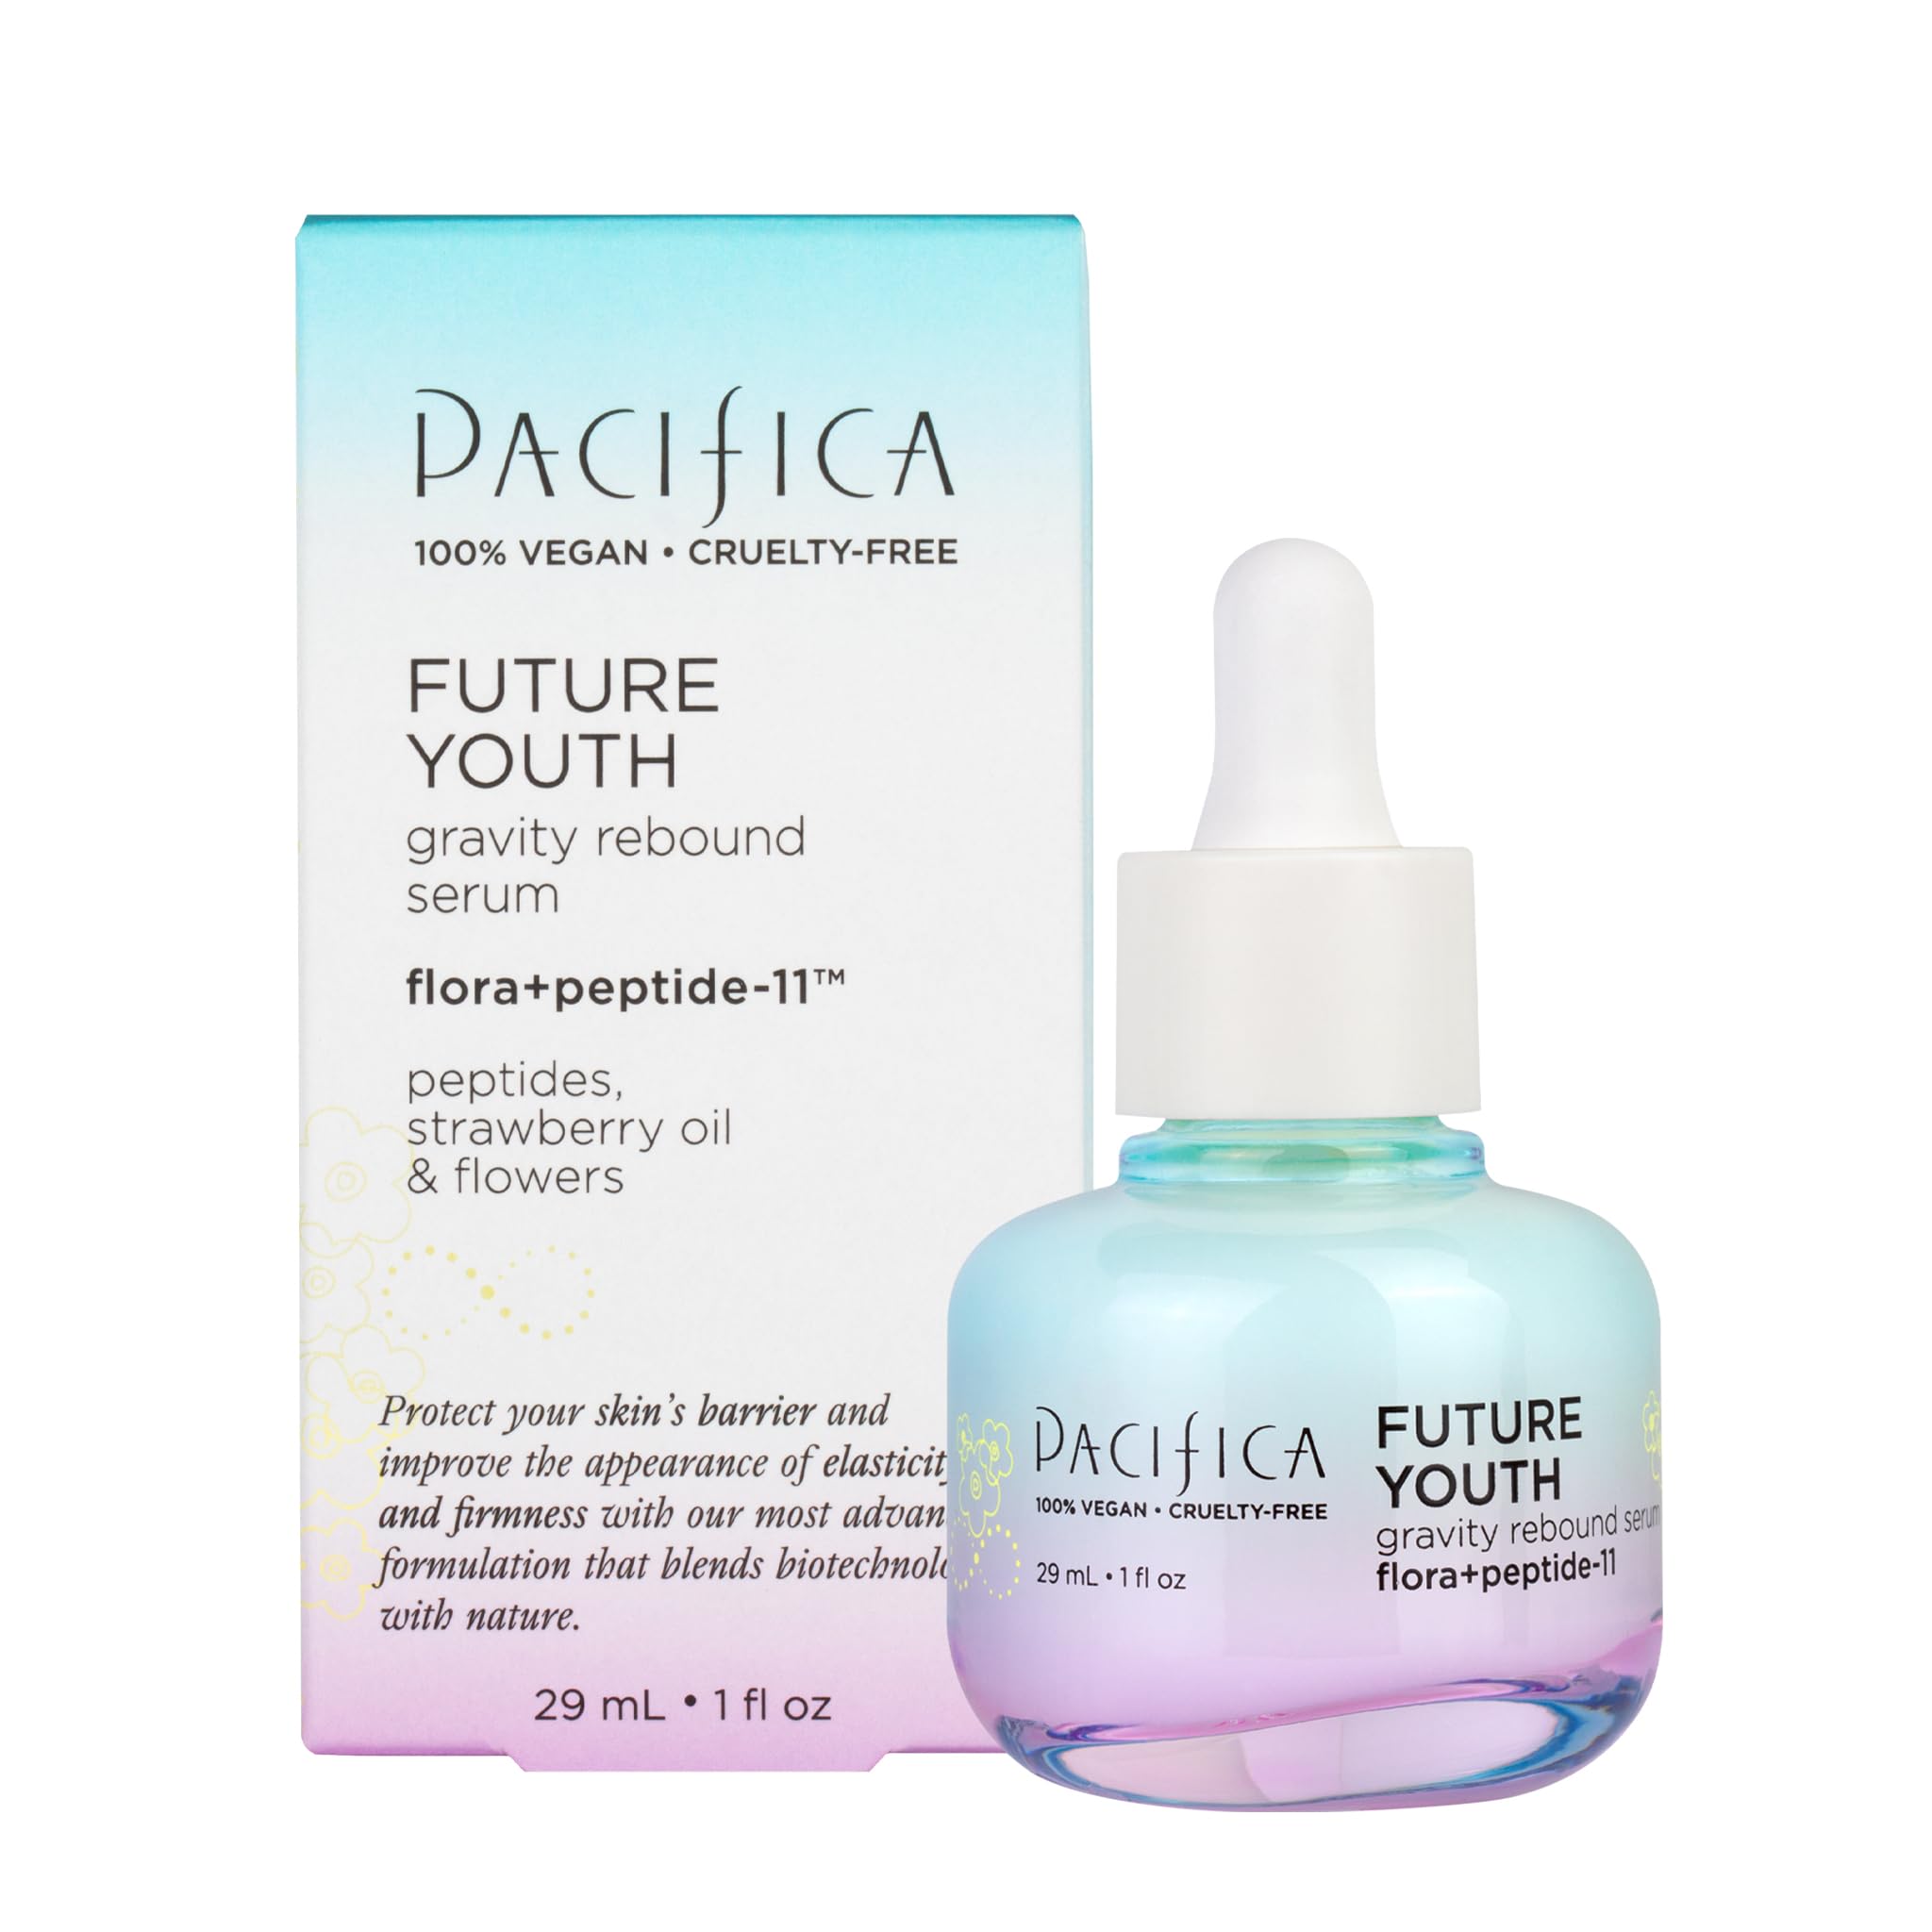 Pacifica Beauty, Future Youth Gravity Rebound Serum, Multi Peptide Complex, Lightweight, Improve Fine Lines, Anti-Aging, Firming, Bouncy Youthful Skin, Vegan, Cruelty Free